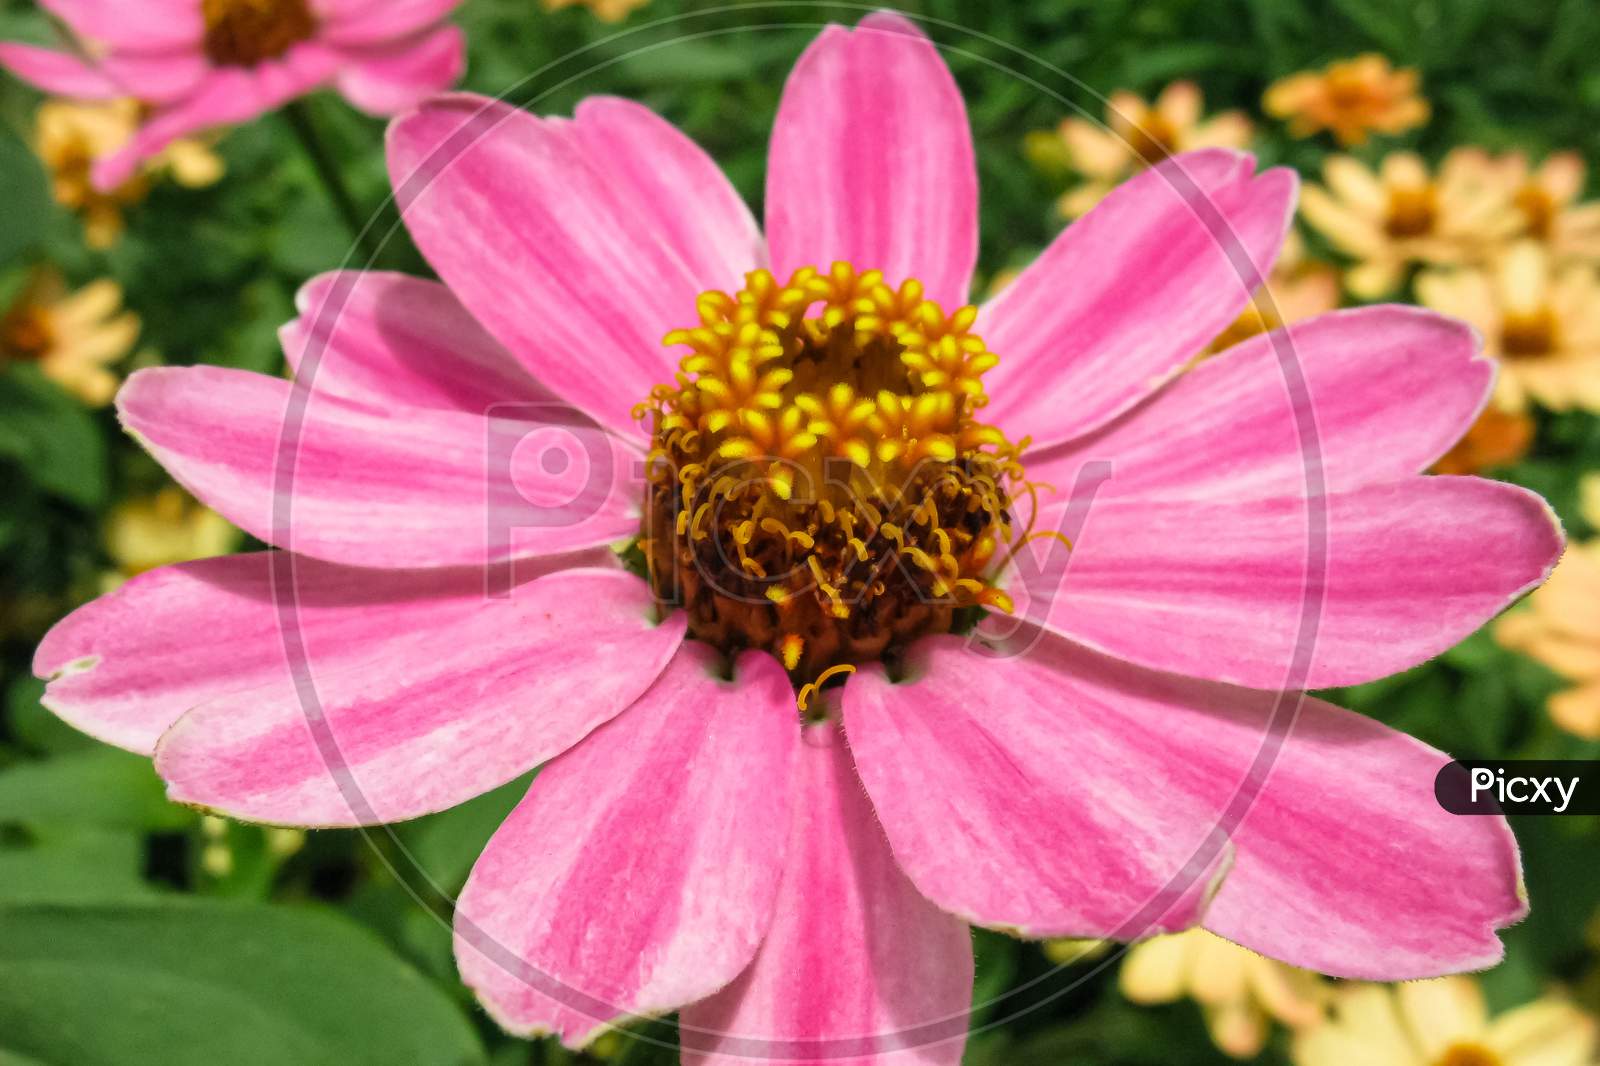 A macro image of a zinnia flower with pink petals and blur background